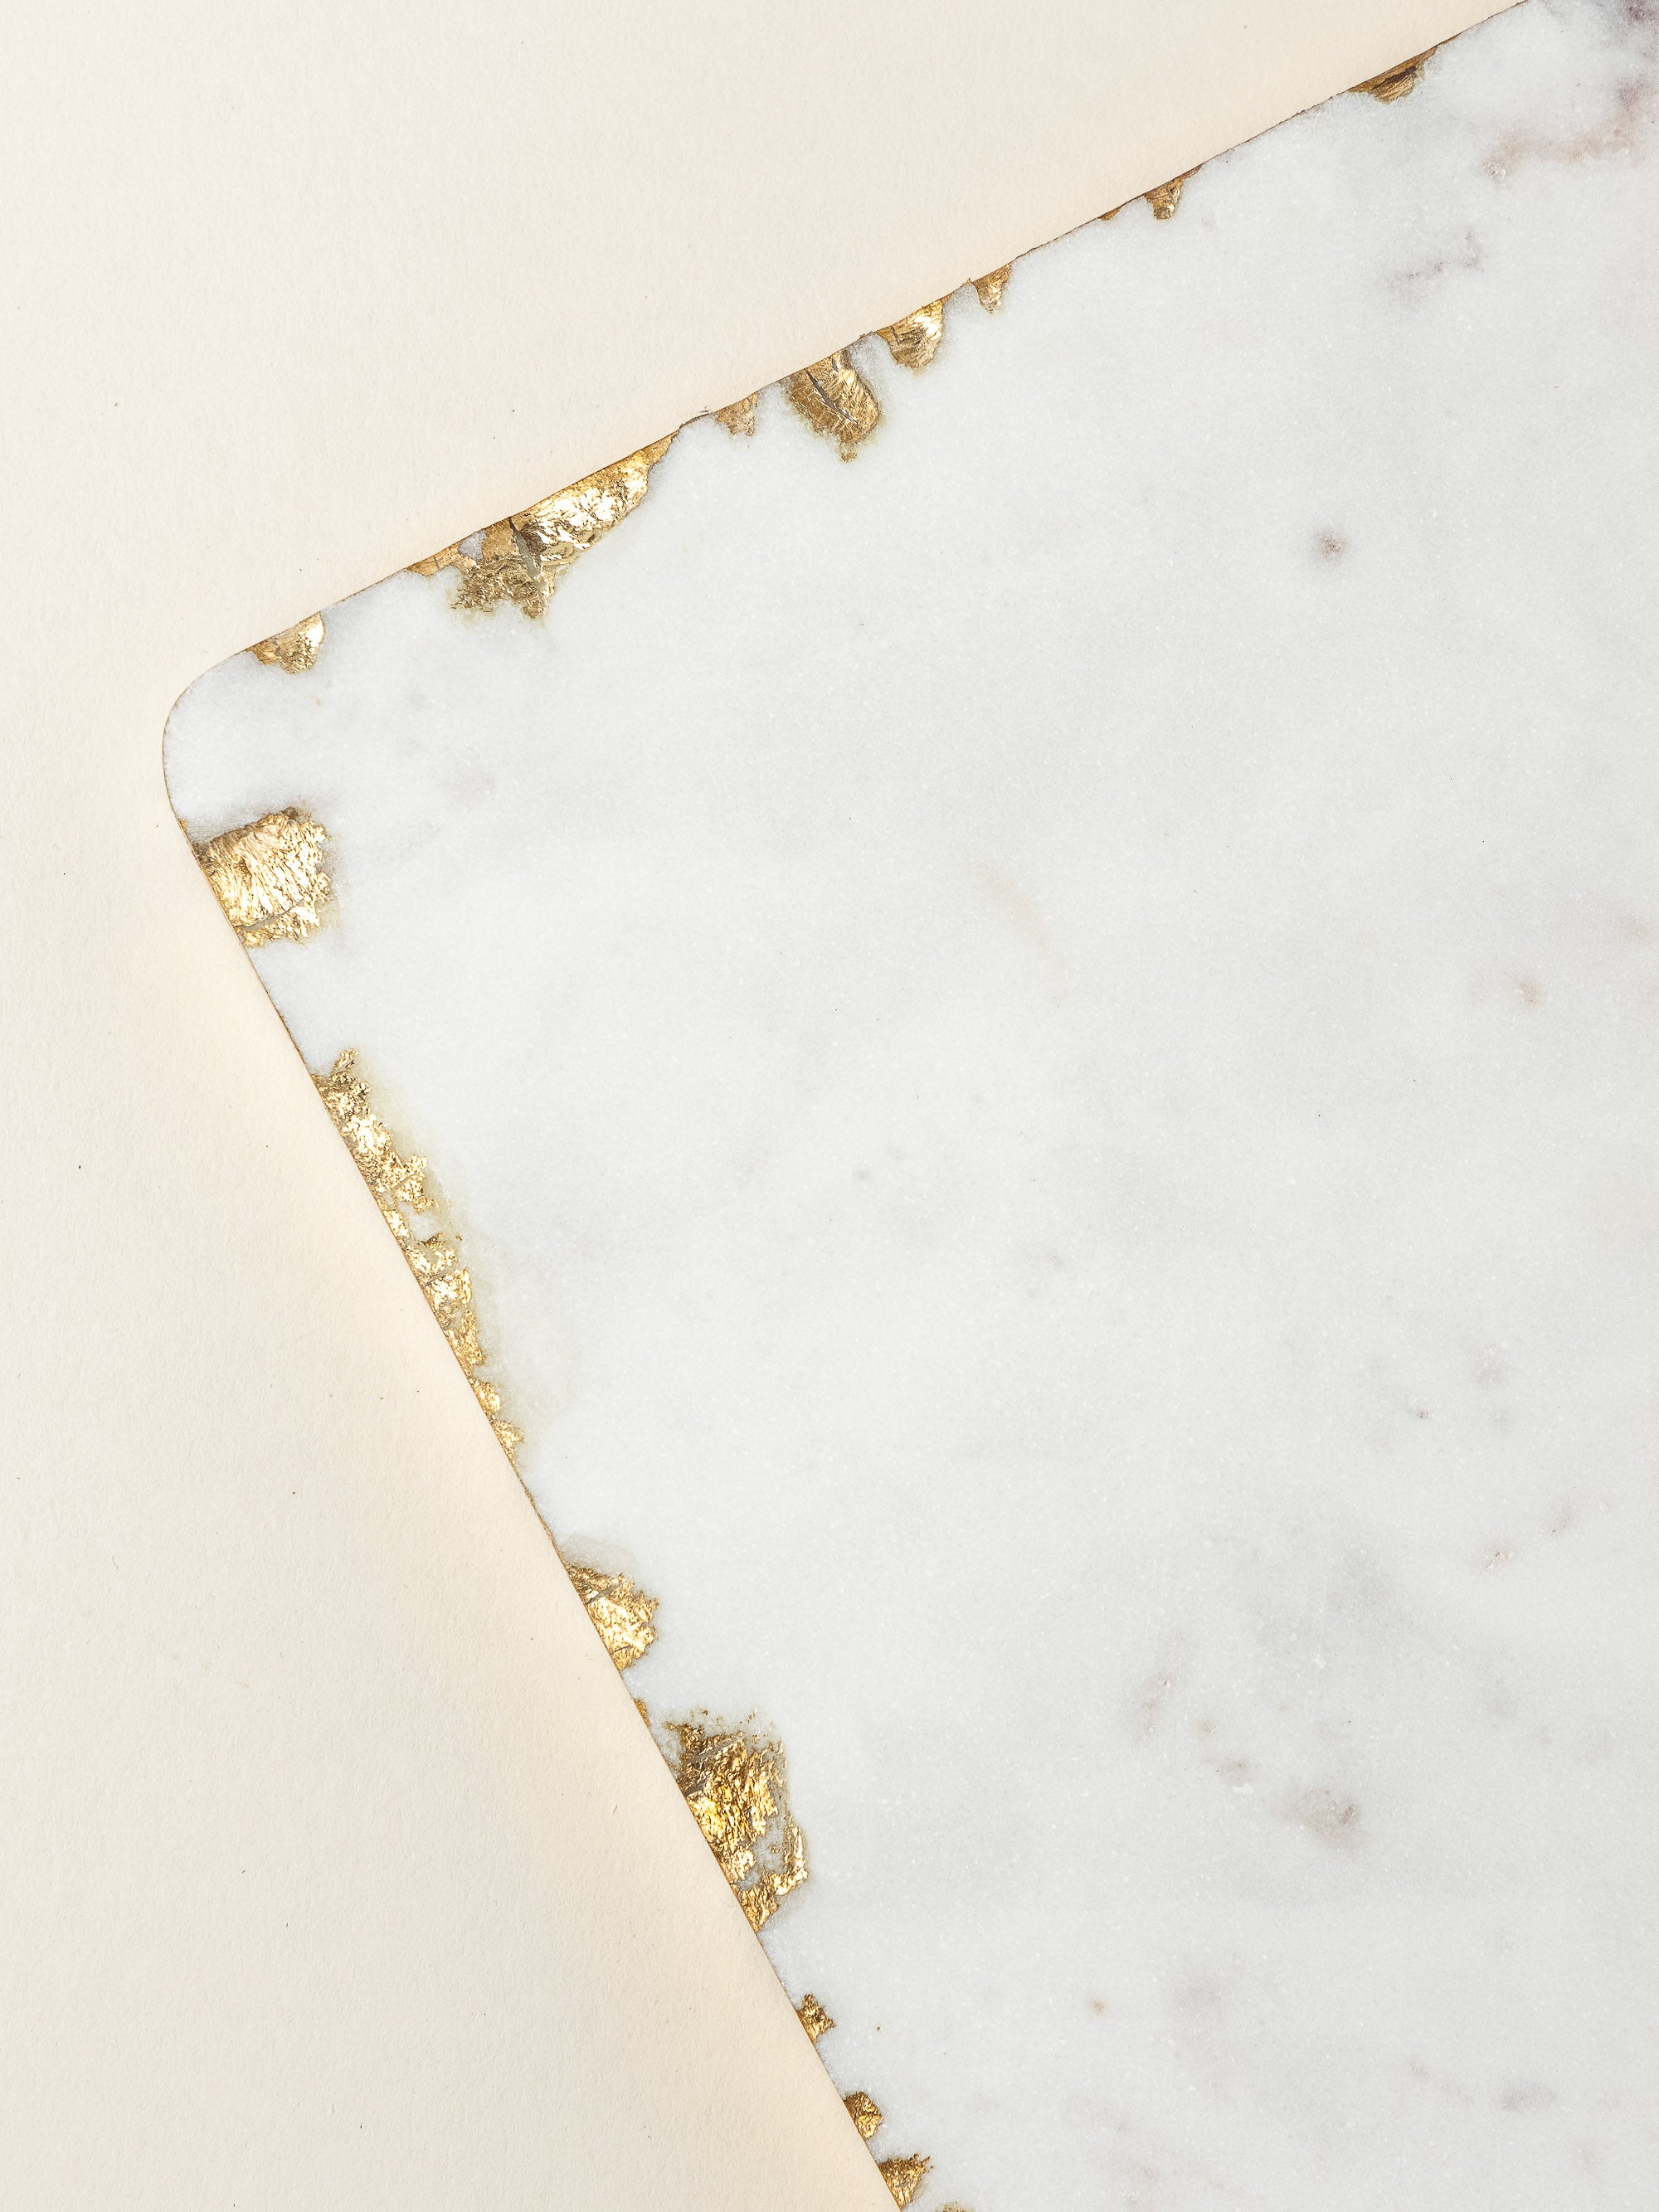 Ceramic with Marble Finish & Gold Edge Commercial Cutting Board or Serving  Plate